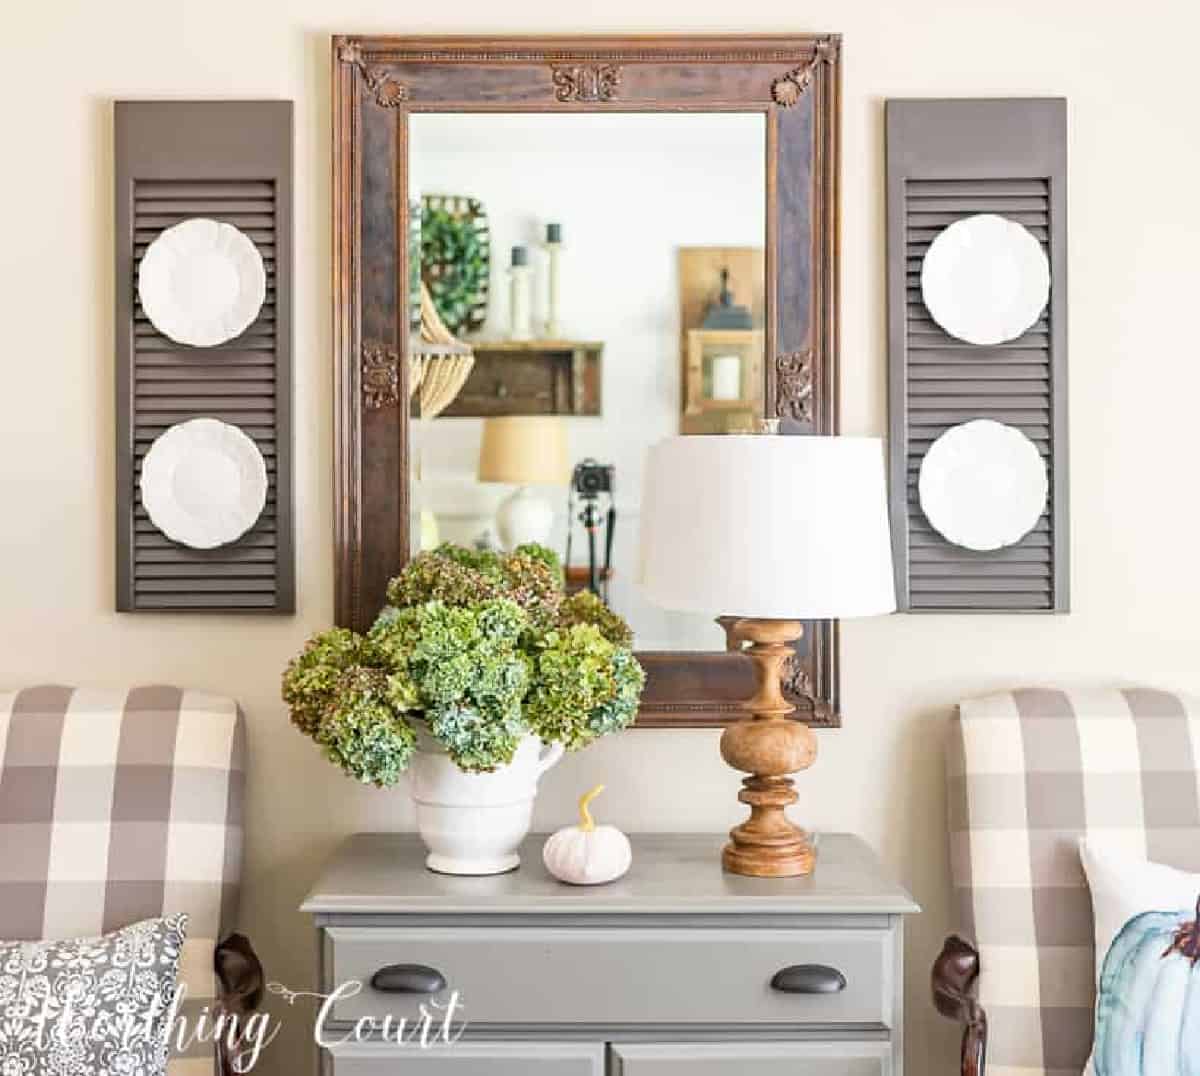 mirror above gray chest, flanked by shutters with lamp and hydrangea arrangement in a white vase